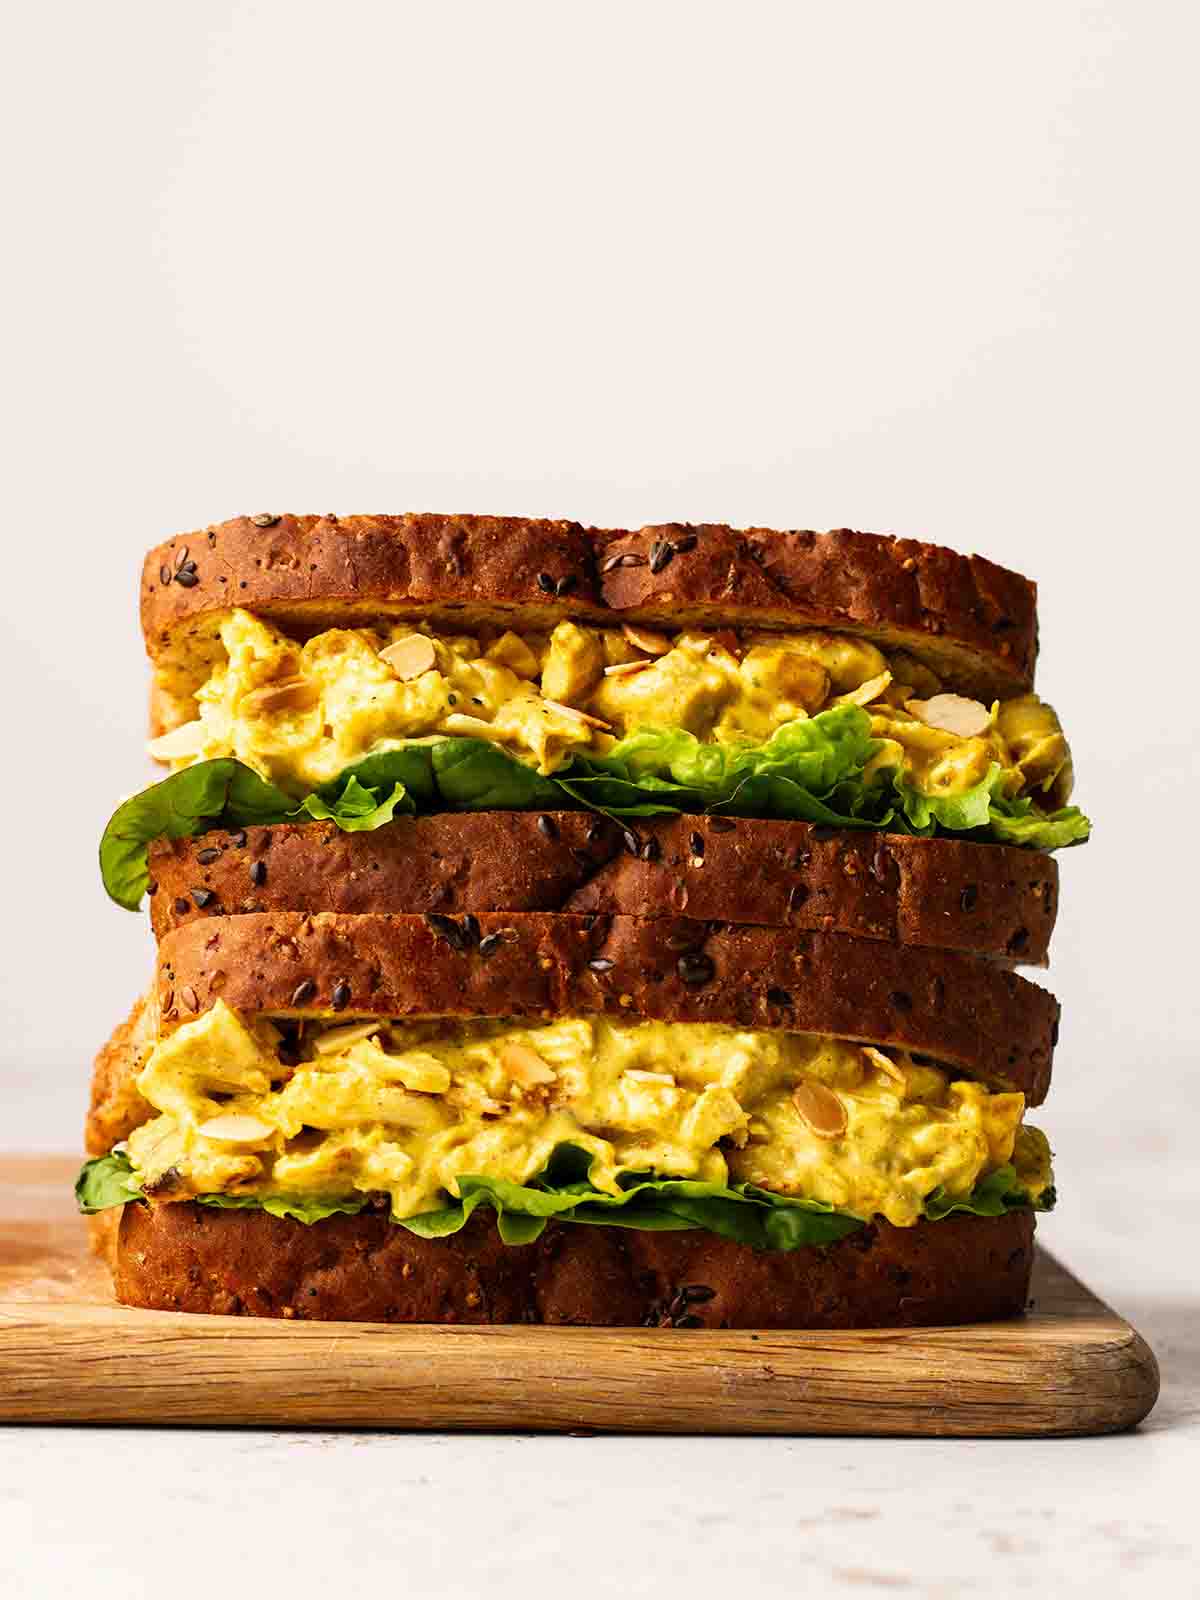 A side view of a Coronation Chicken Sandwich, filled with lettuce and ready to eat.